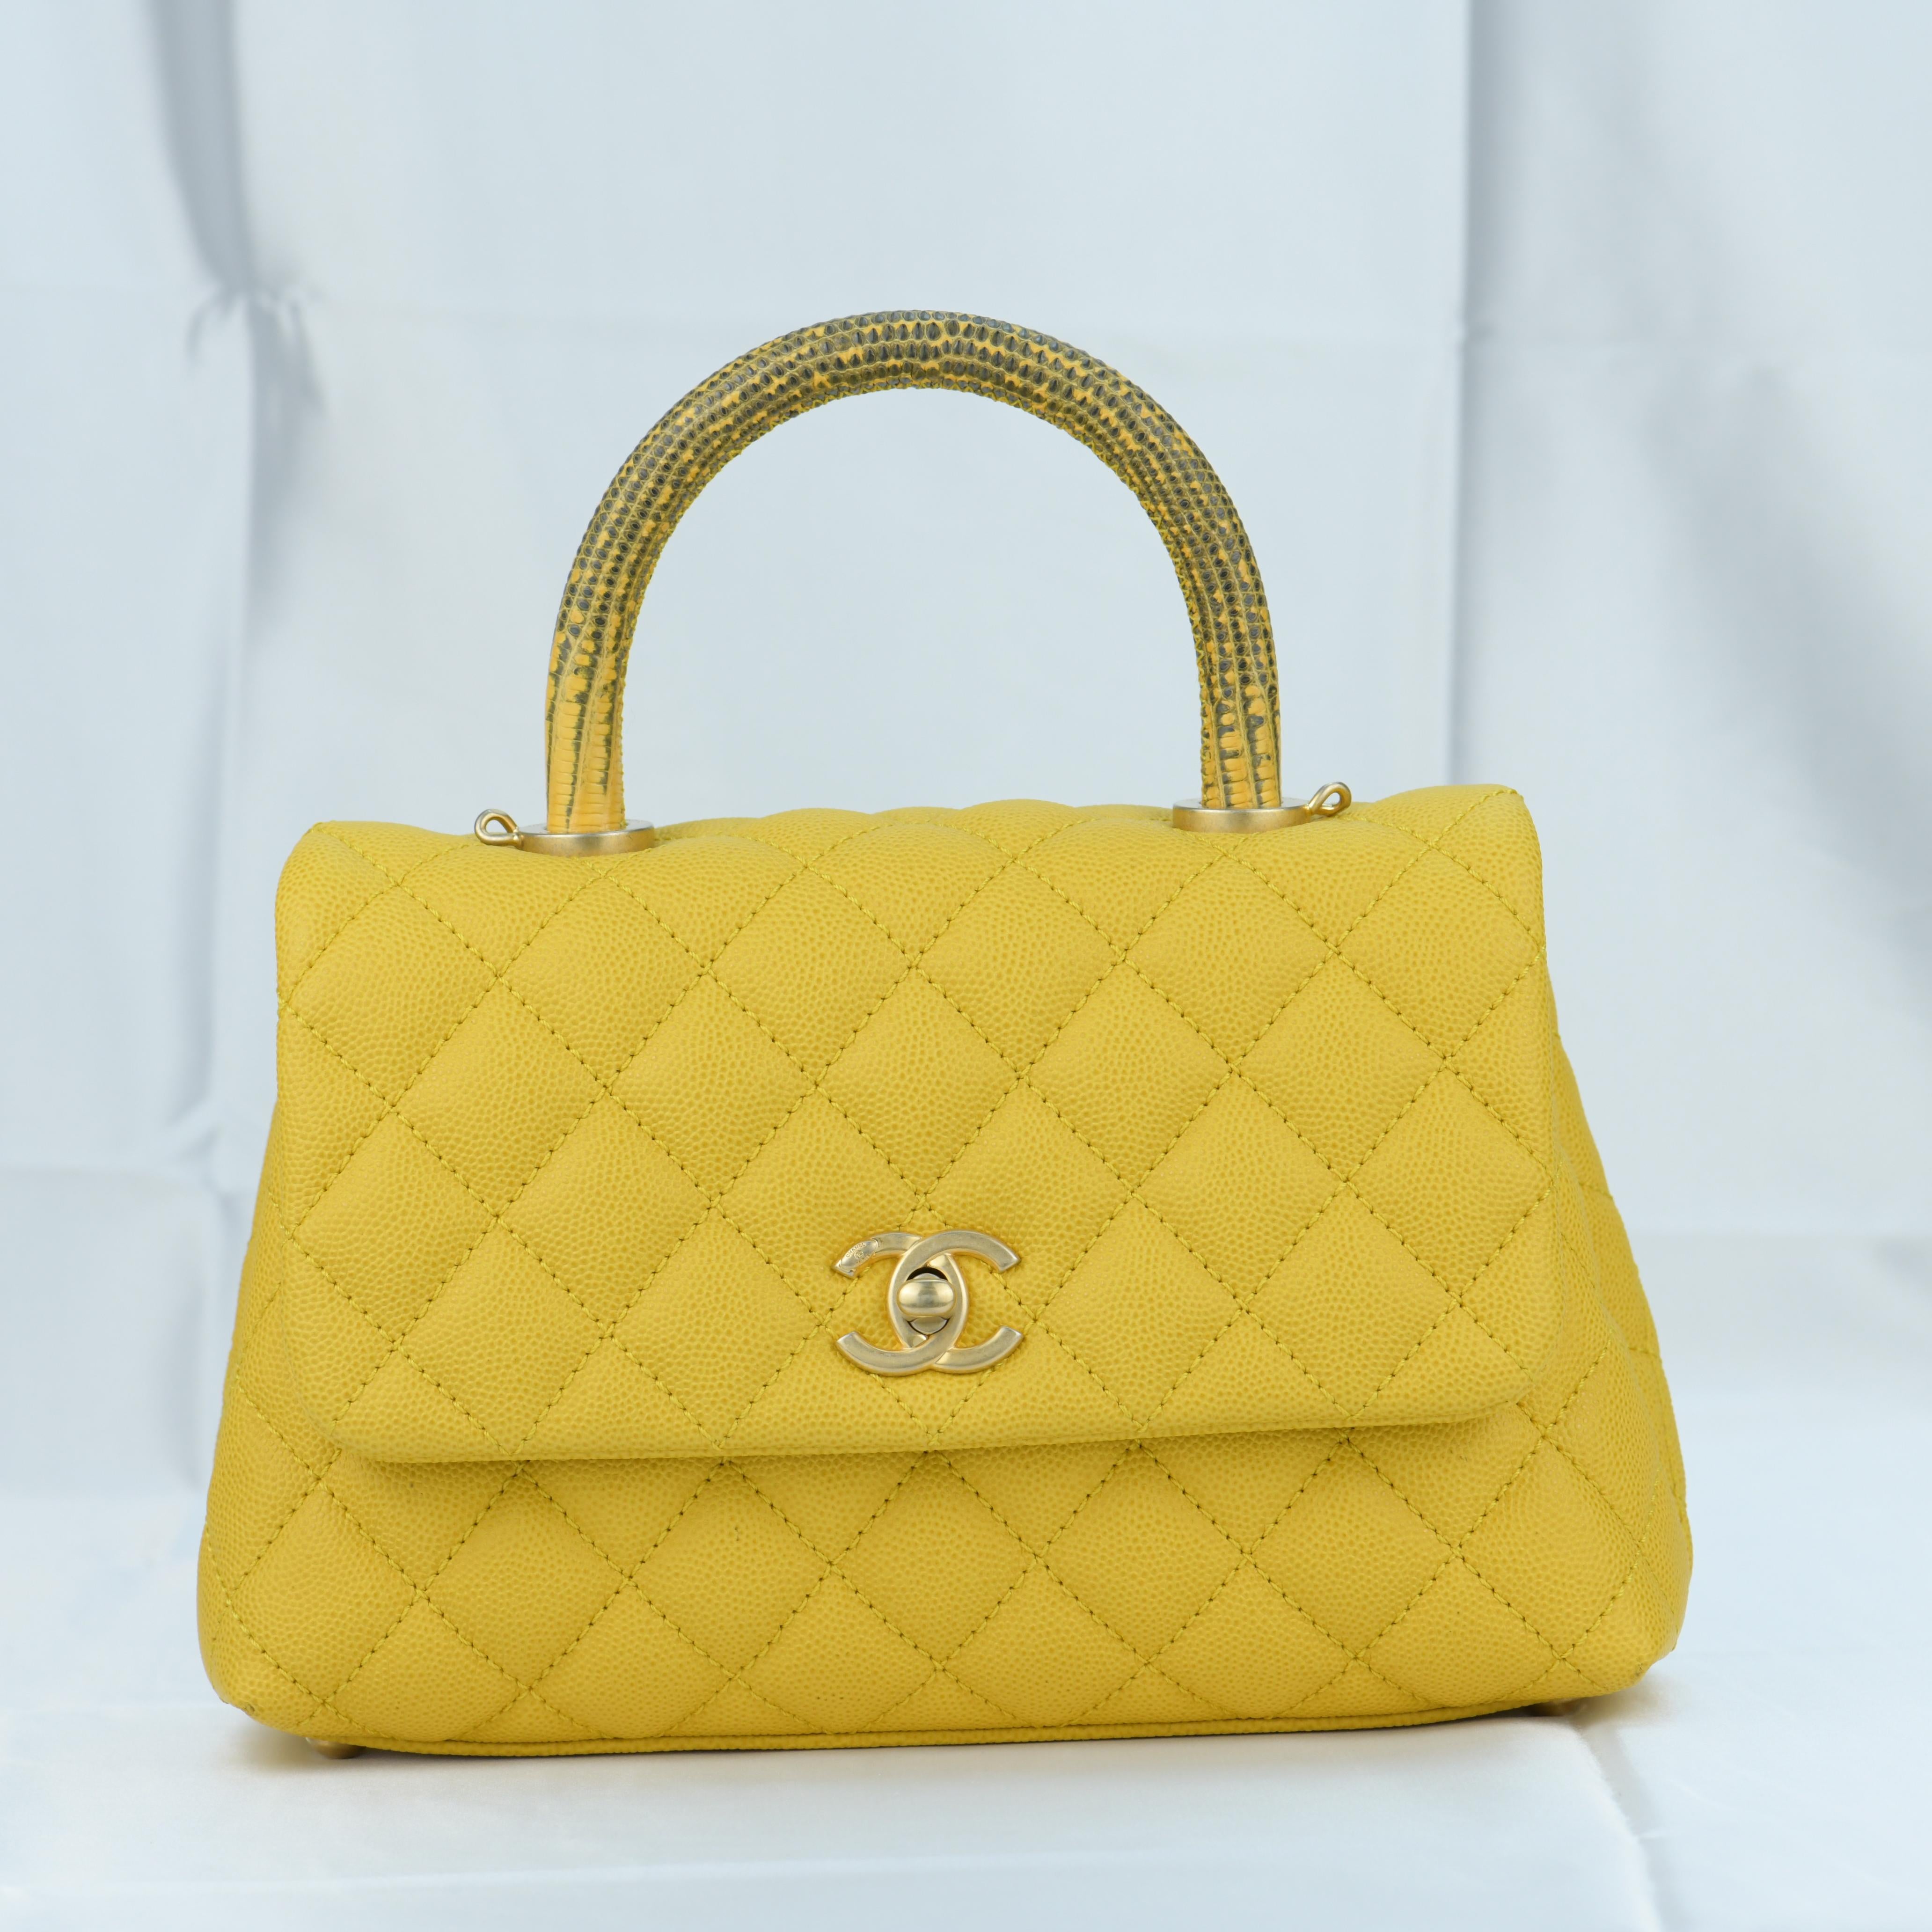 Brand	Chanel
Model	Coco Handle
Serial No.	25******
Color	Yellow
Date	Approx. 2018
Metal	Gold
Material	Caviar Calfskin, Lizard Skin Handle
Measurements    Approx. 22cm x 16cm x 6cm
Condition	Excellent 
Comes with	Chanel Dust bag and Authentic